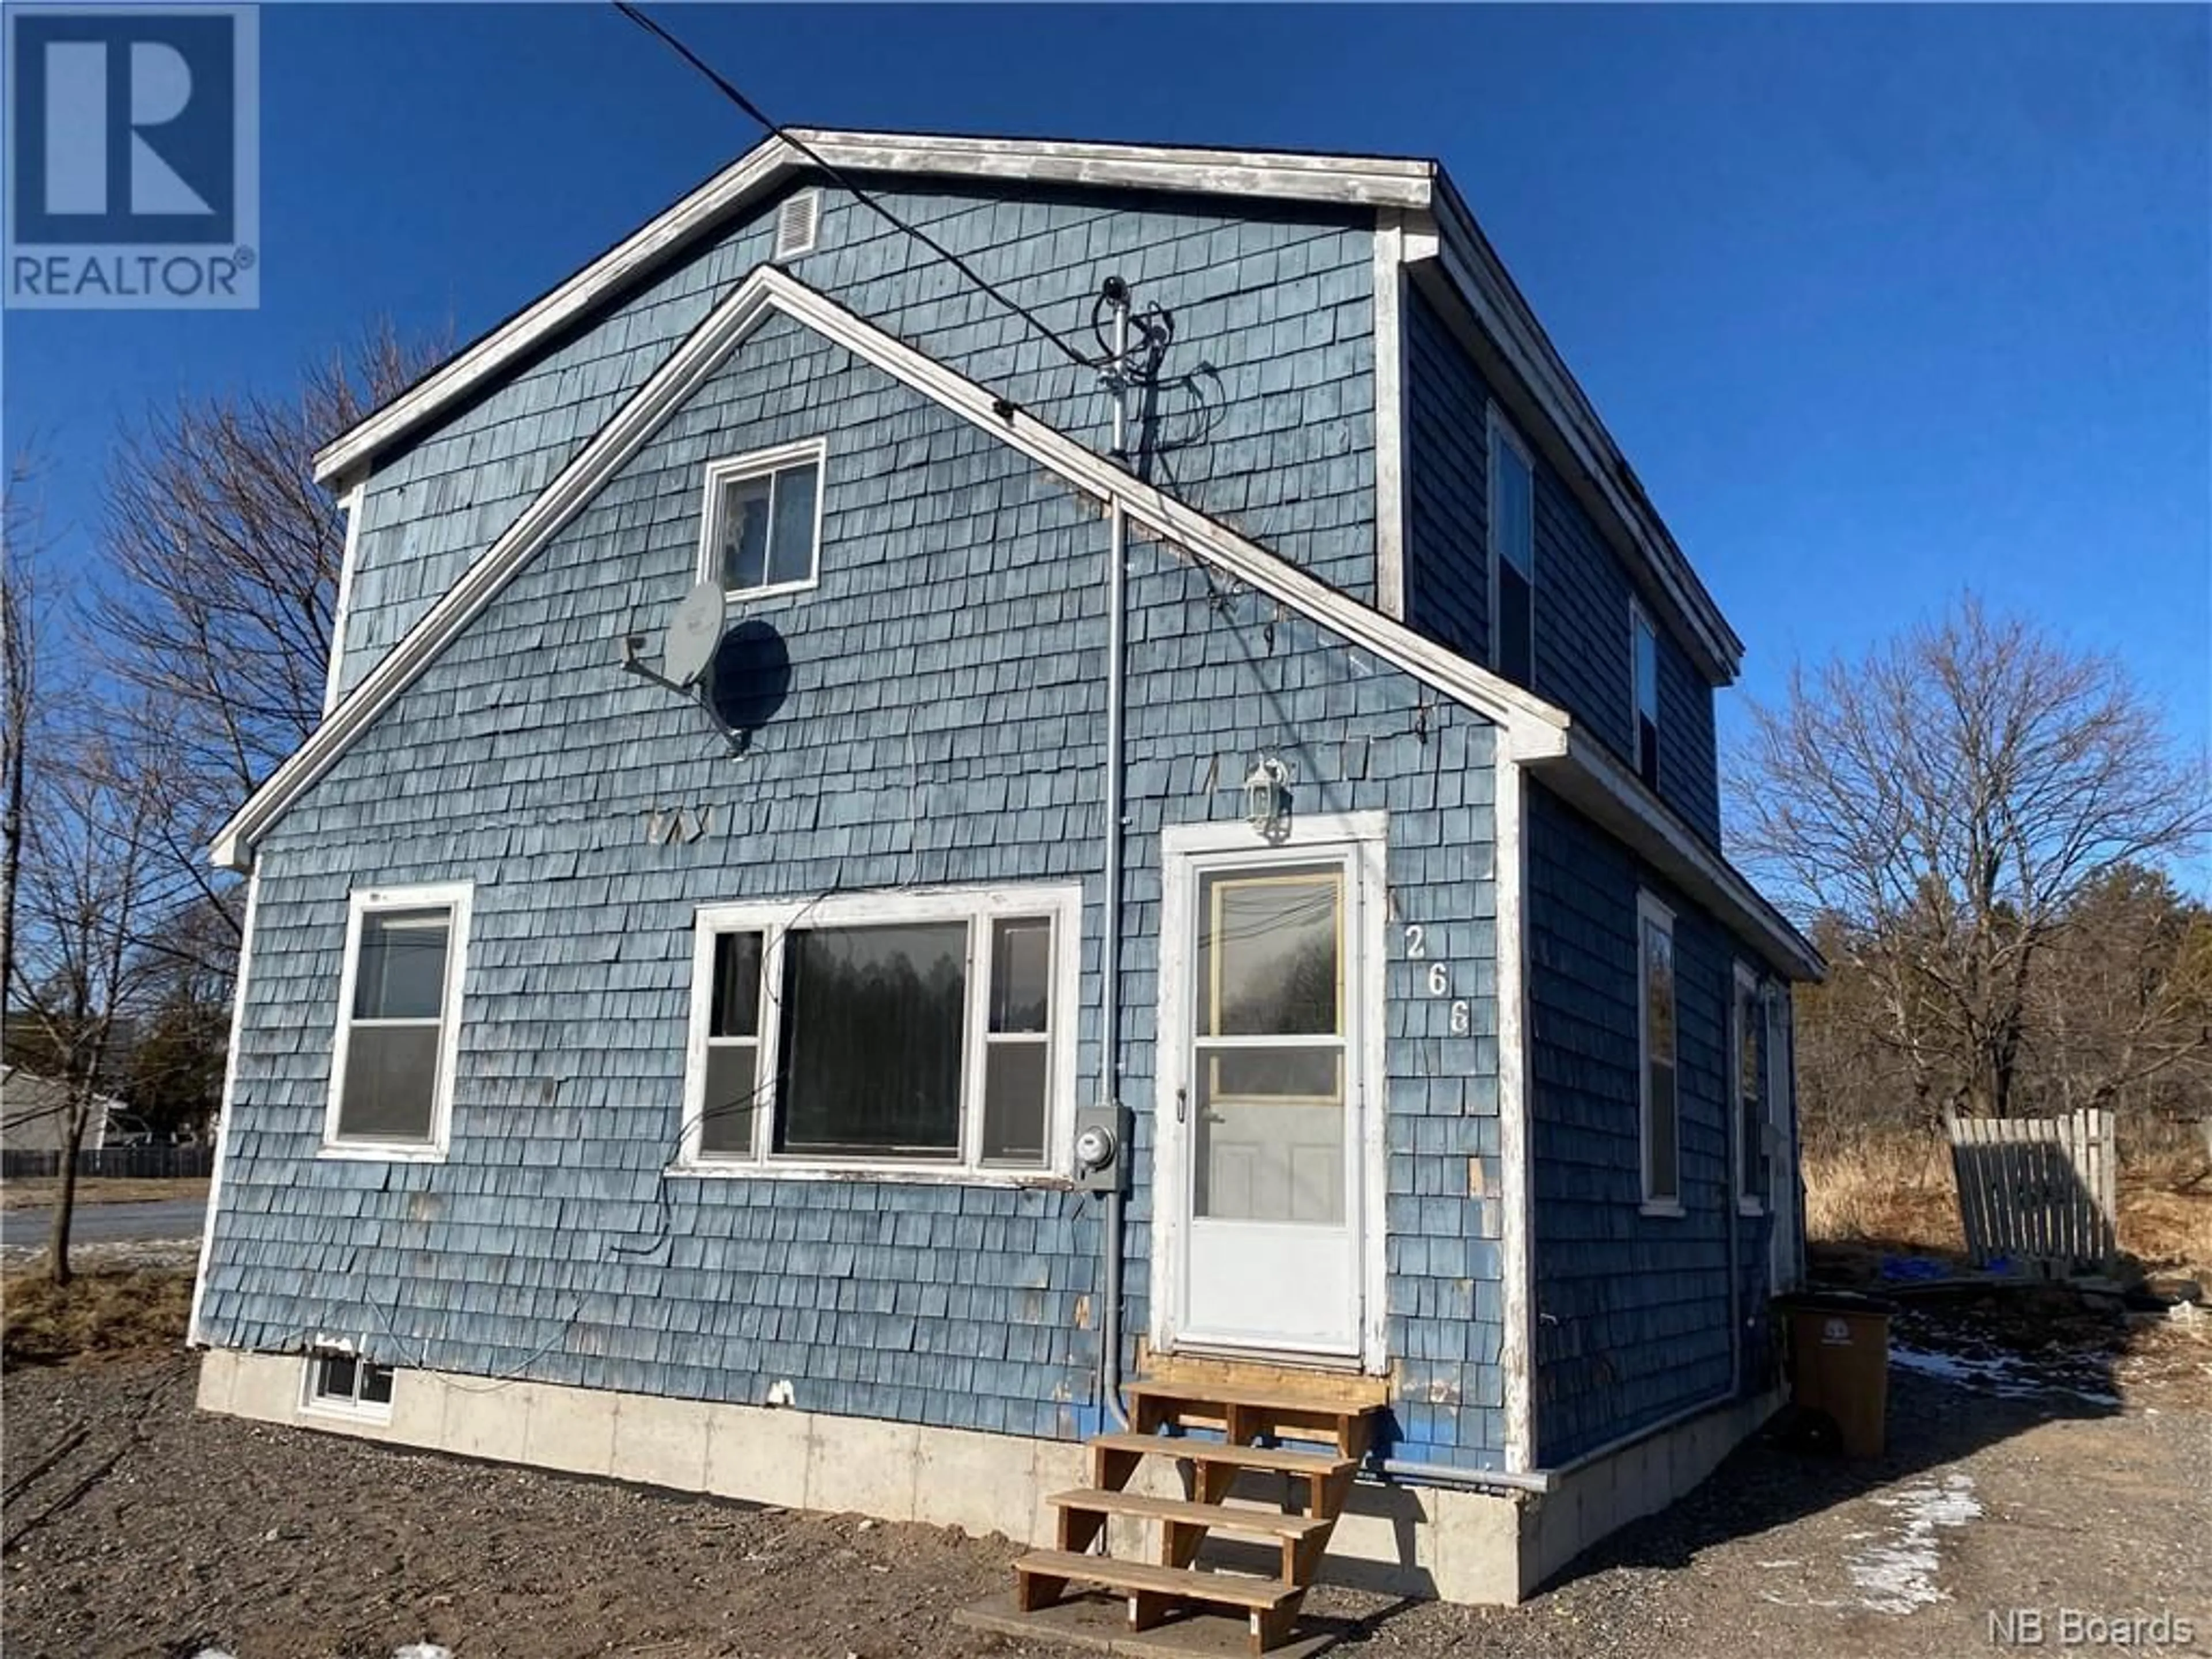 Home with unknown exterior material for 266 Kingsville Road, Saint John New Brunswick E2M4T2